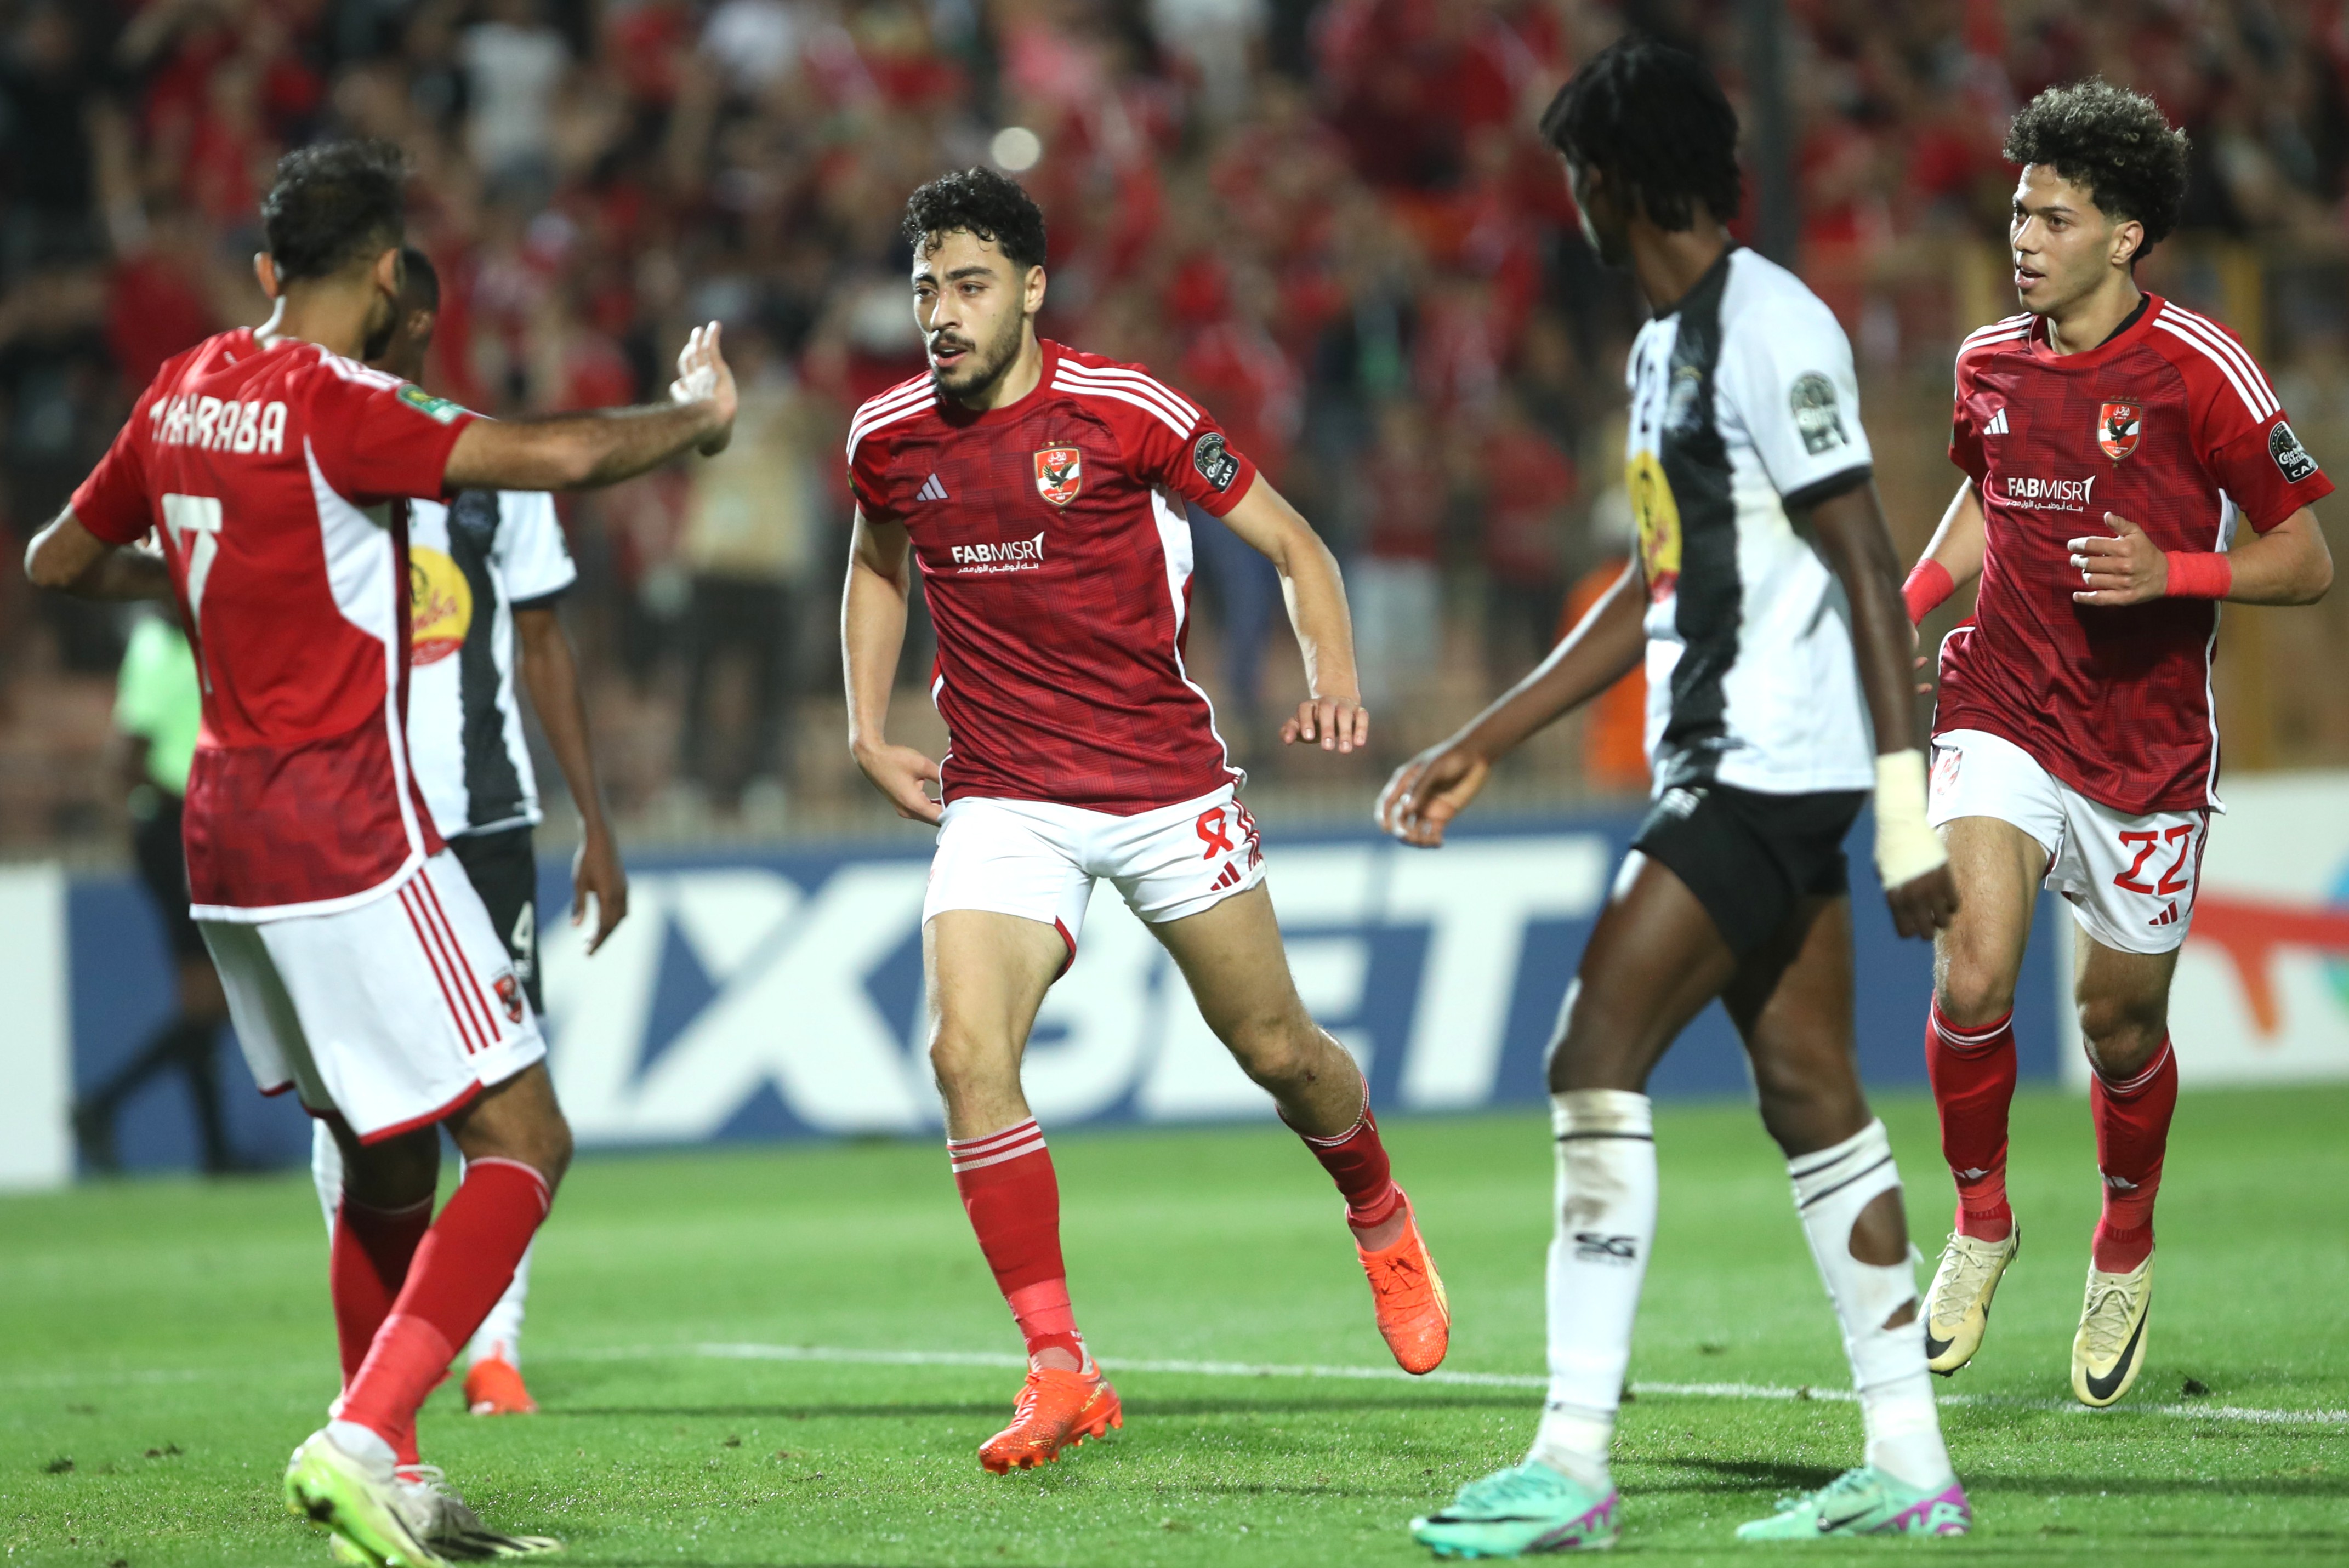 Al Ahly stage late rally to defeat Mazembe and reach final